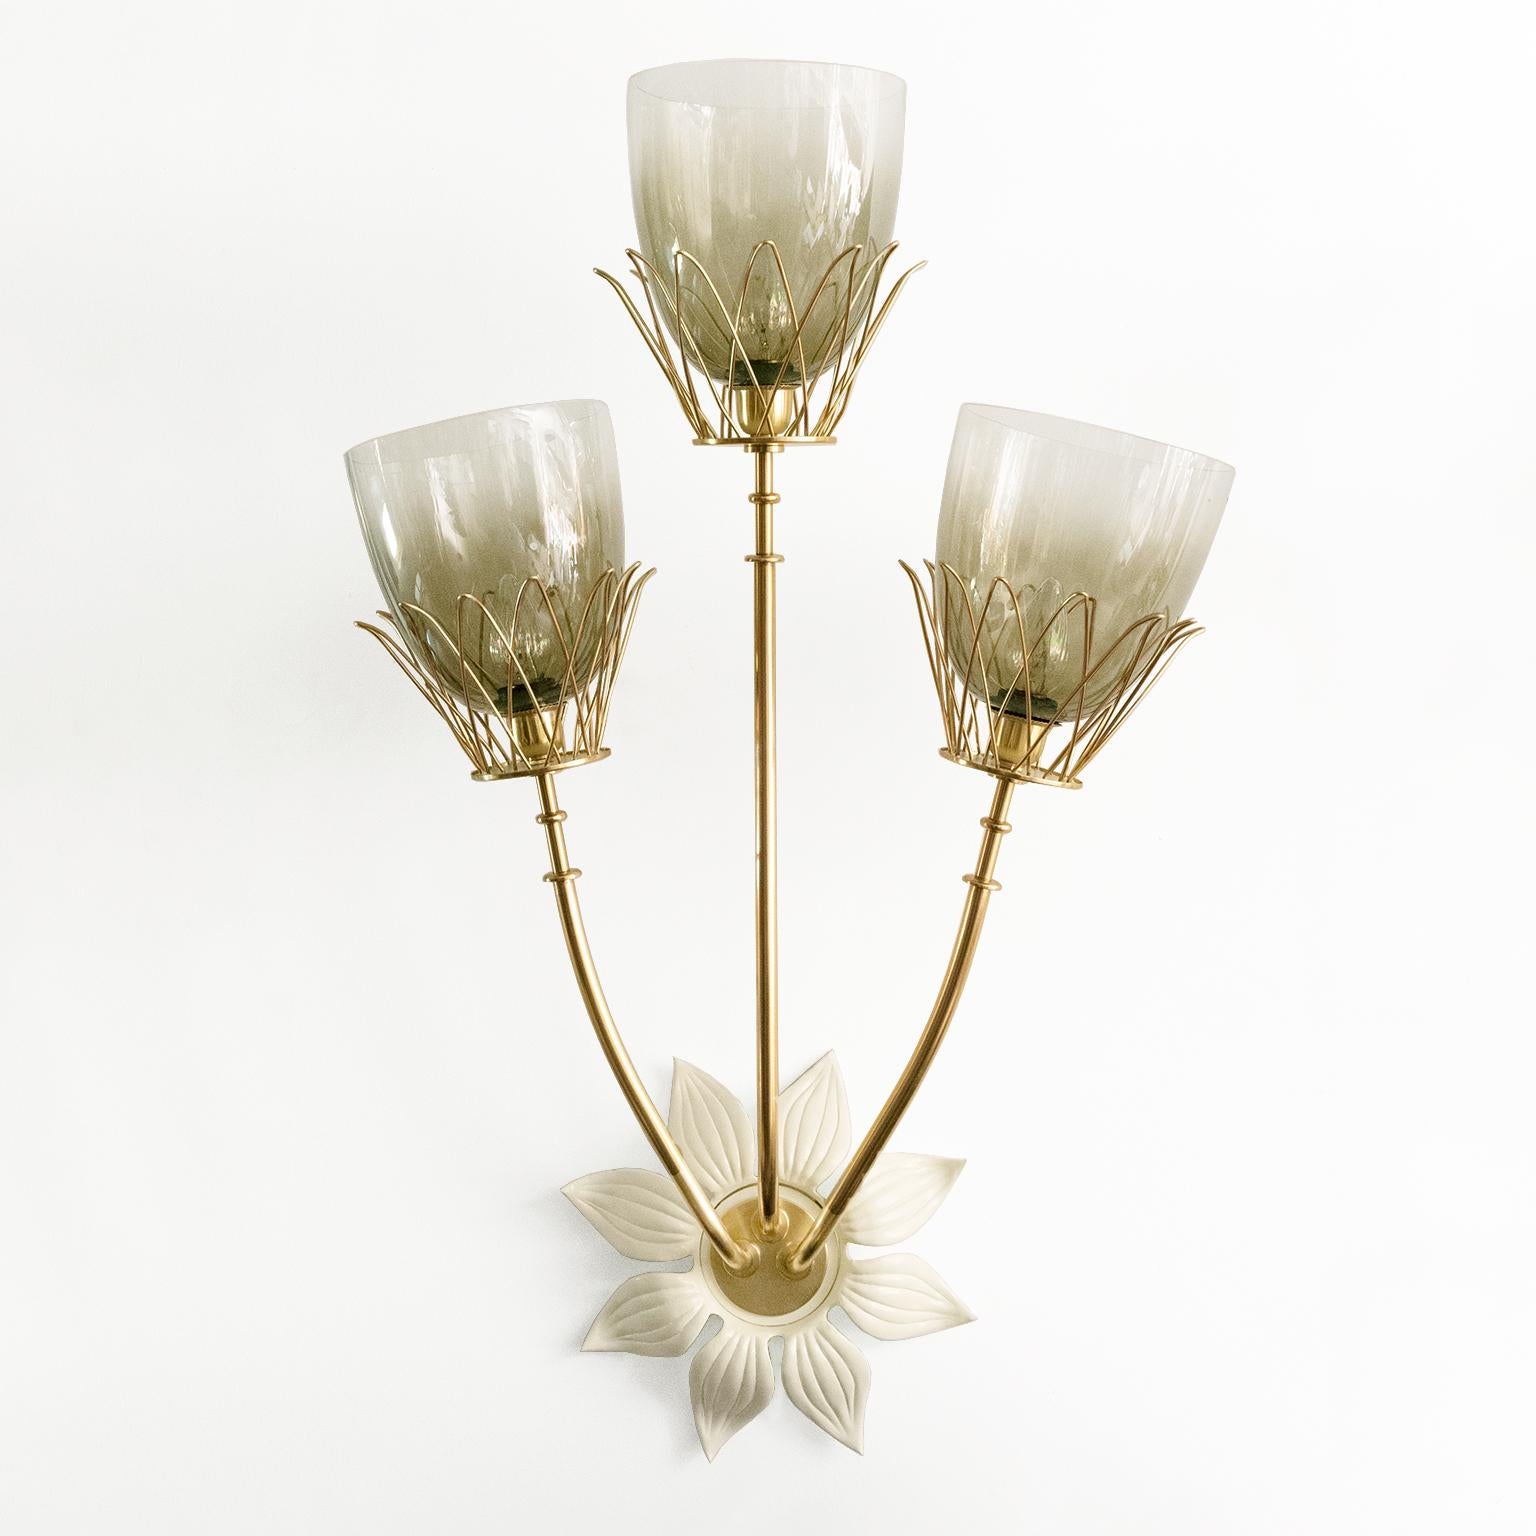 Large Hans Bergstrom, Scandinavian Modern 3-arm sconce in brass with lacquered metal backplate in the form of a flower. Each arm ends with a brass wire petal form shade holder. These shades are replacements. The sconce has been newly polished and